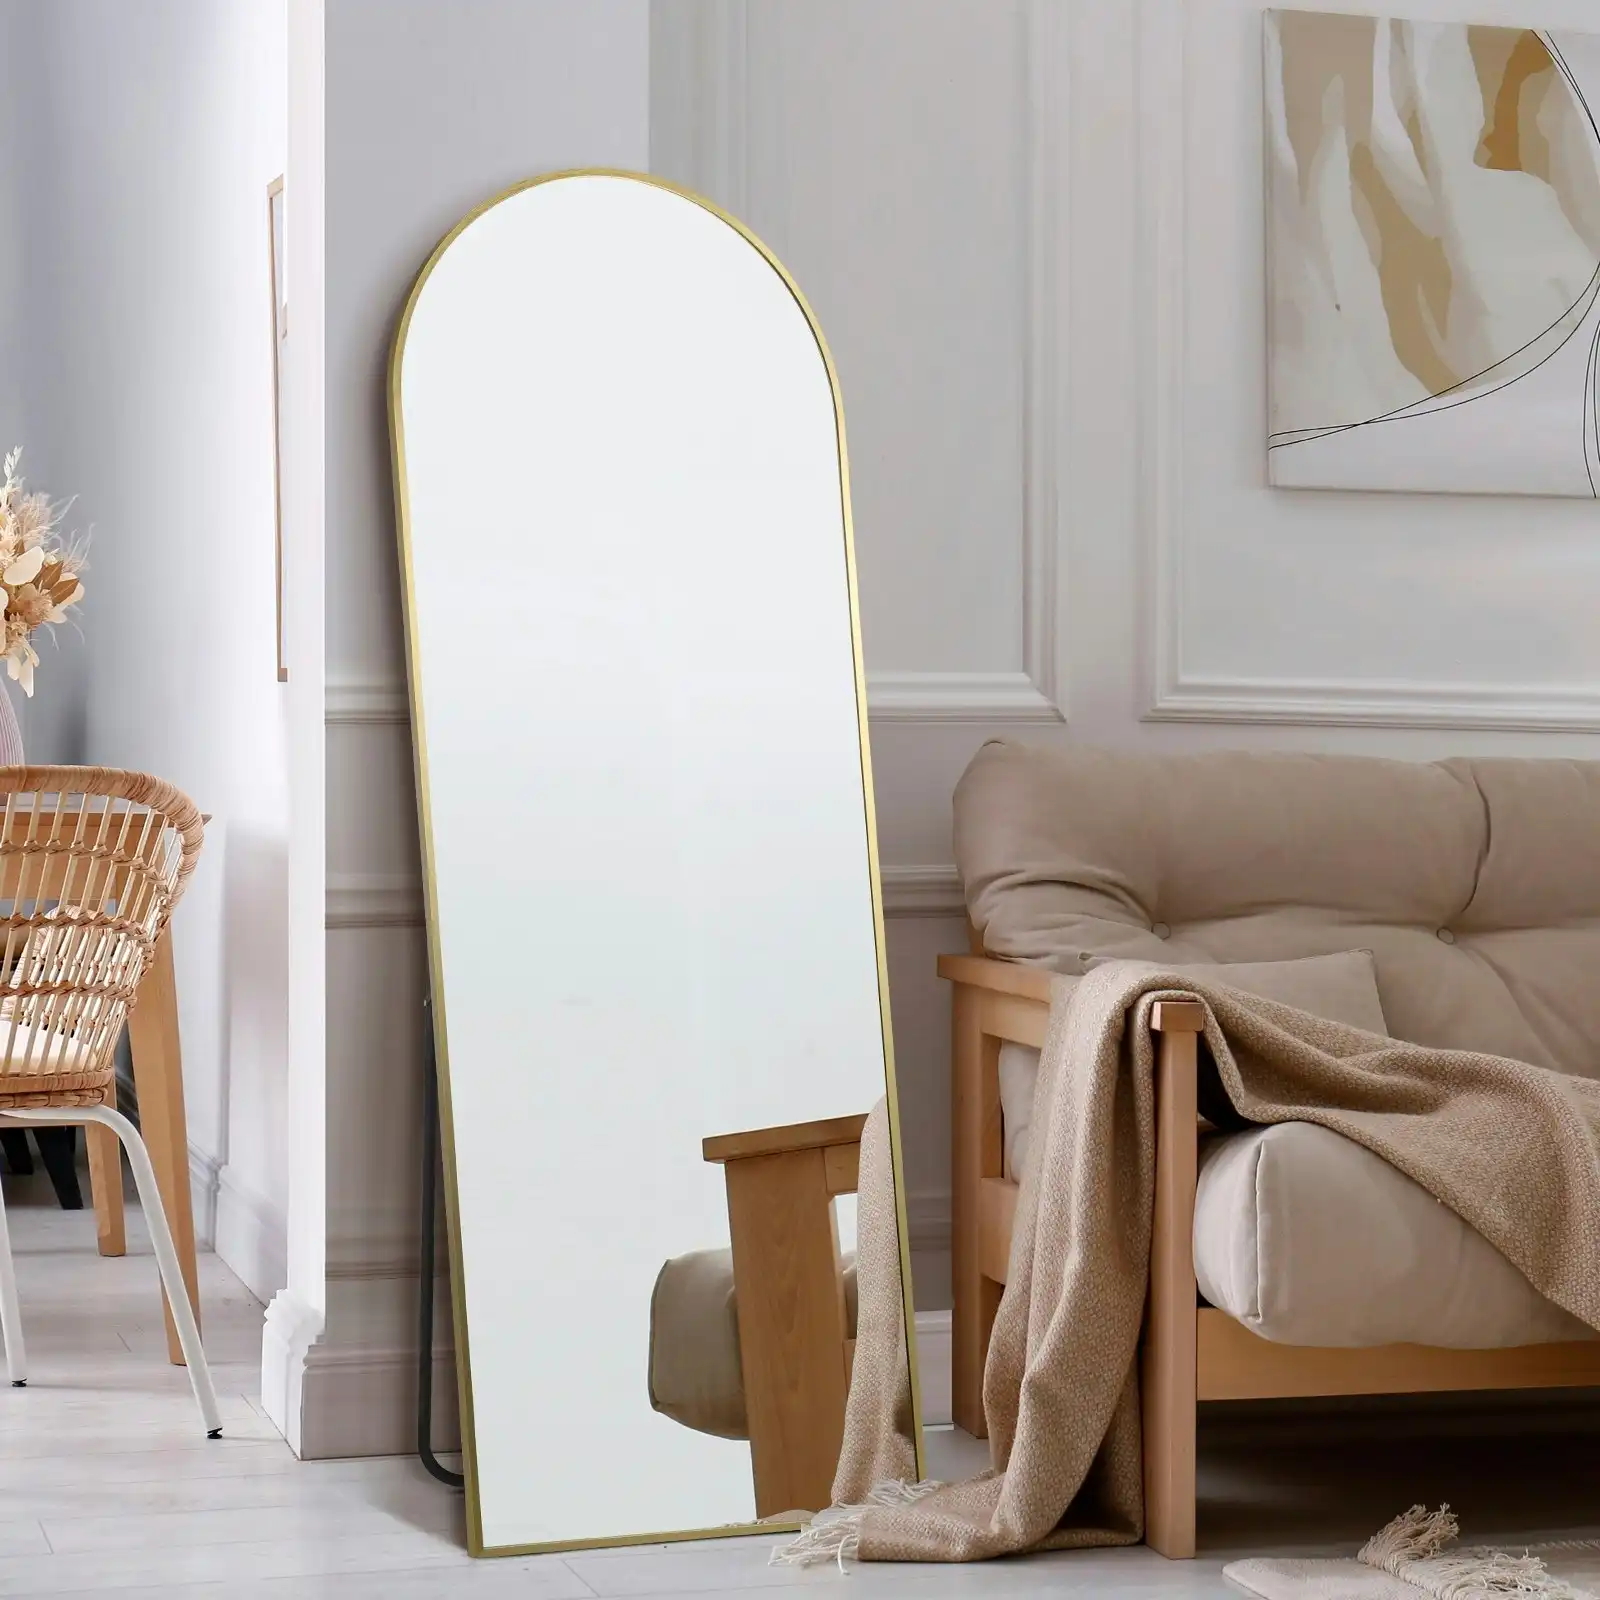 Oikiture 166x60cm Full Length Mirror Arched Dressing Floor Mirrors Free Standing Gold